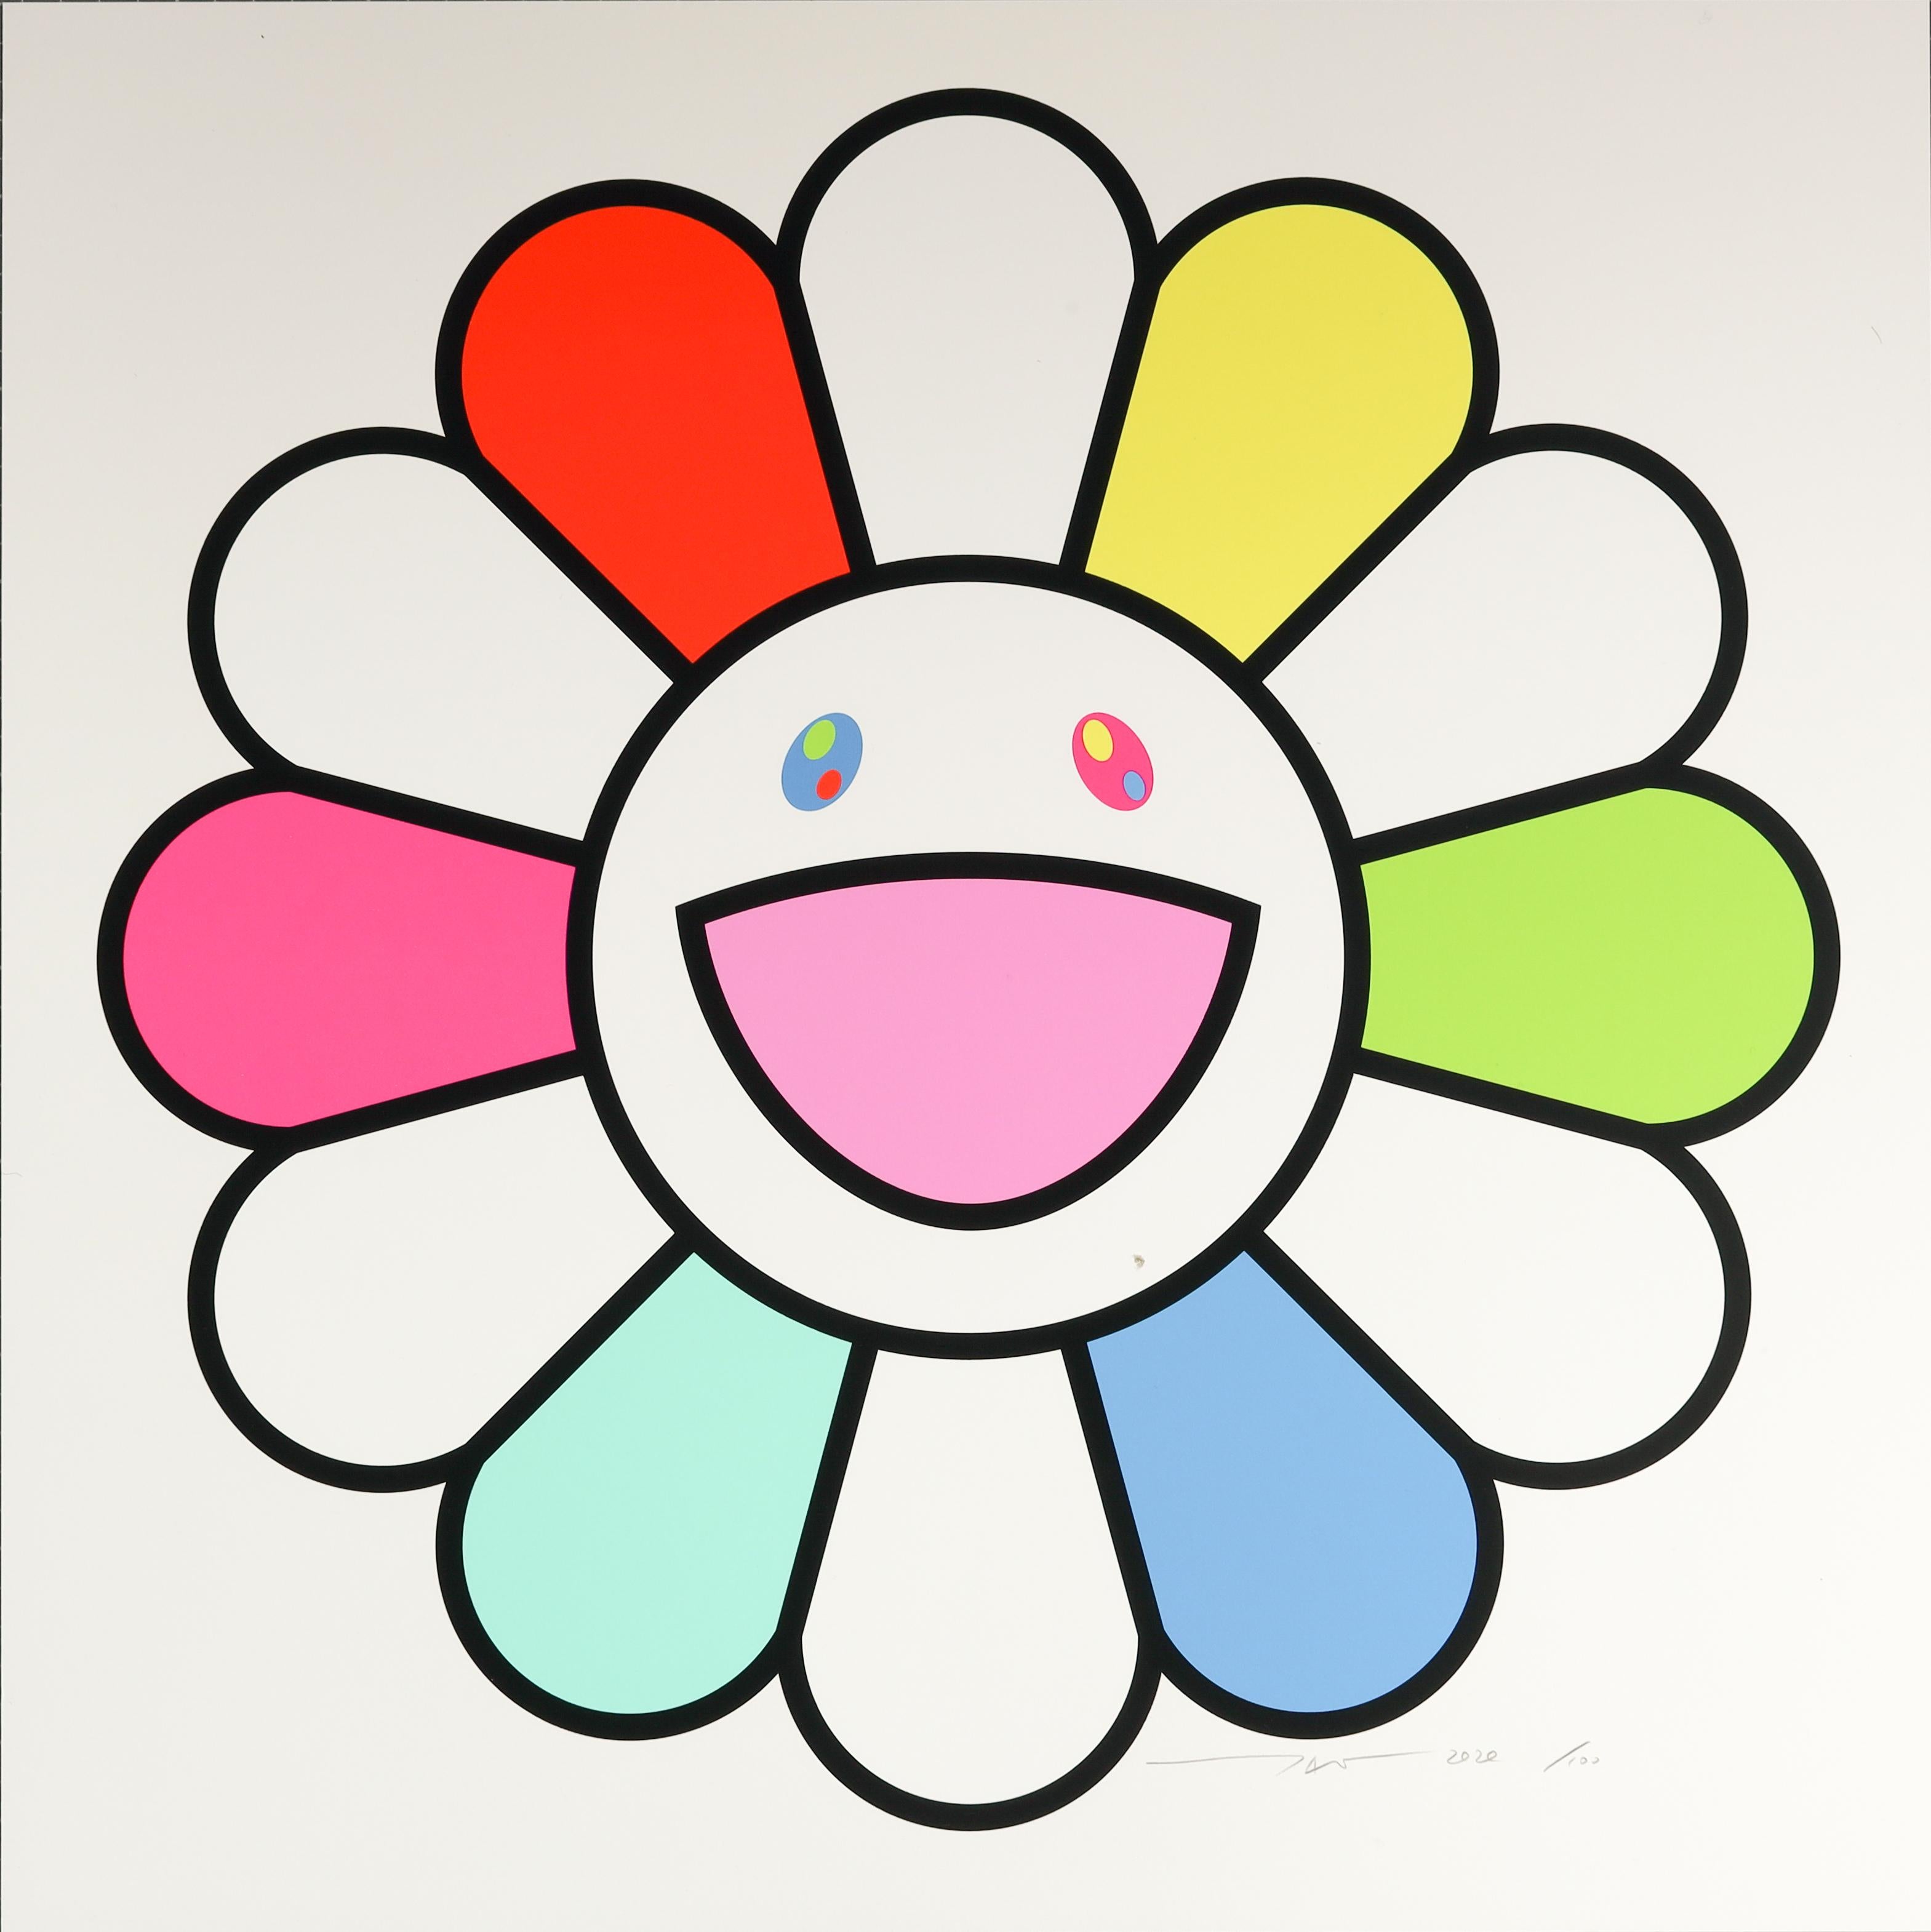 Smiley Days with Ms. Flower to You! - Print by Takashi Murakami